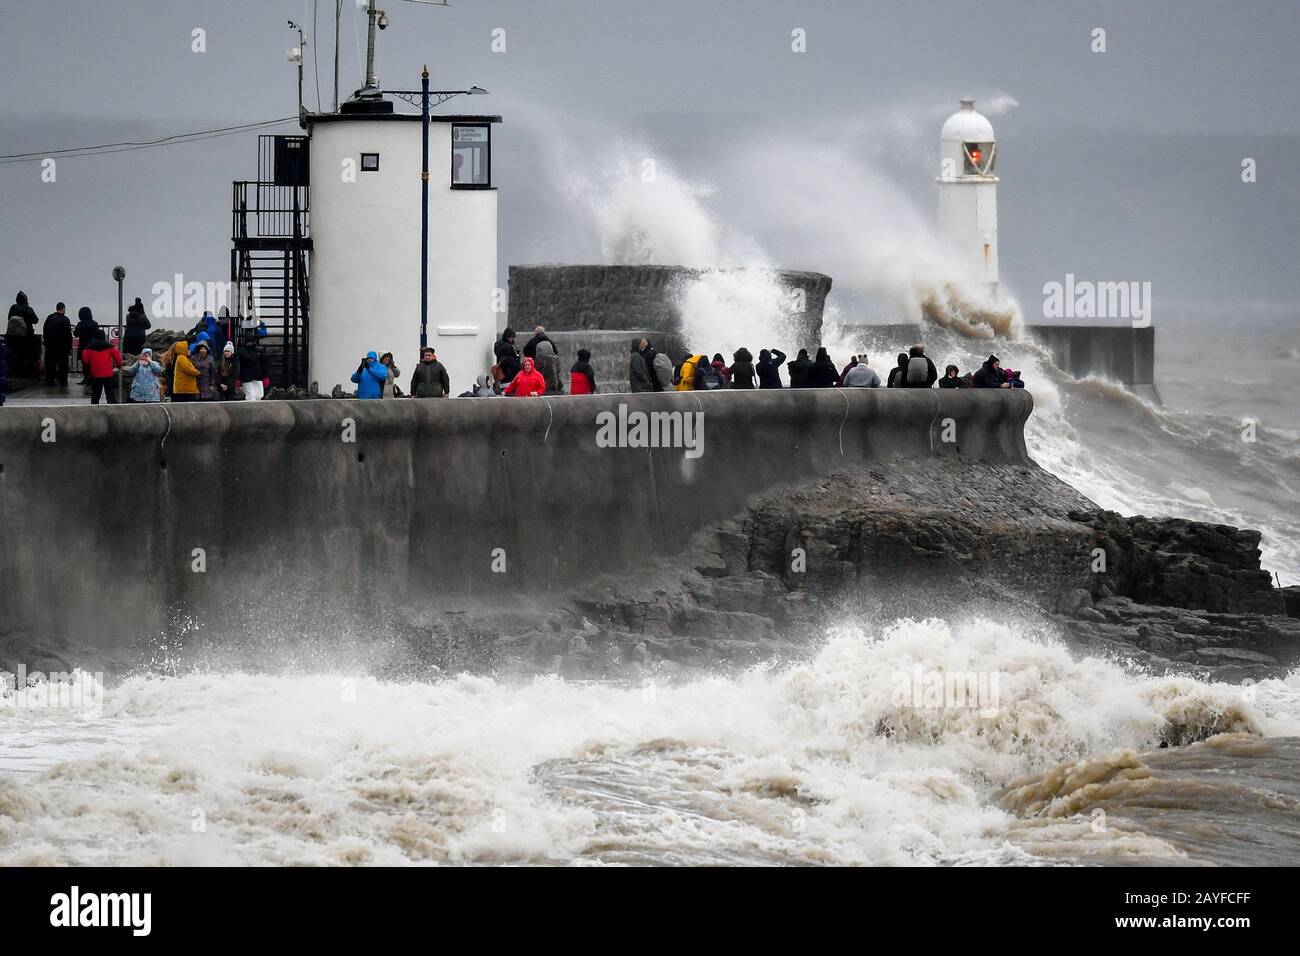 People watch waves and rough seas pound against the harbour wall at Porthcawl, Wales, as the UK is braced for widespread weather disruption for the second weekend in a row as Storm Dennis sweeps in. Stock Photo